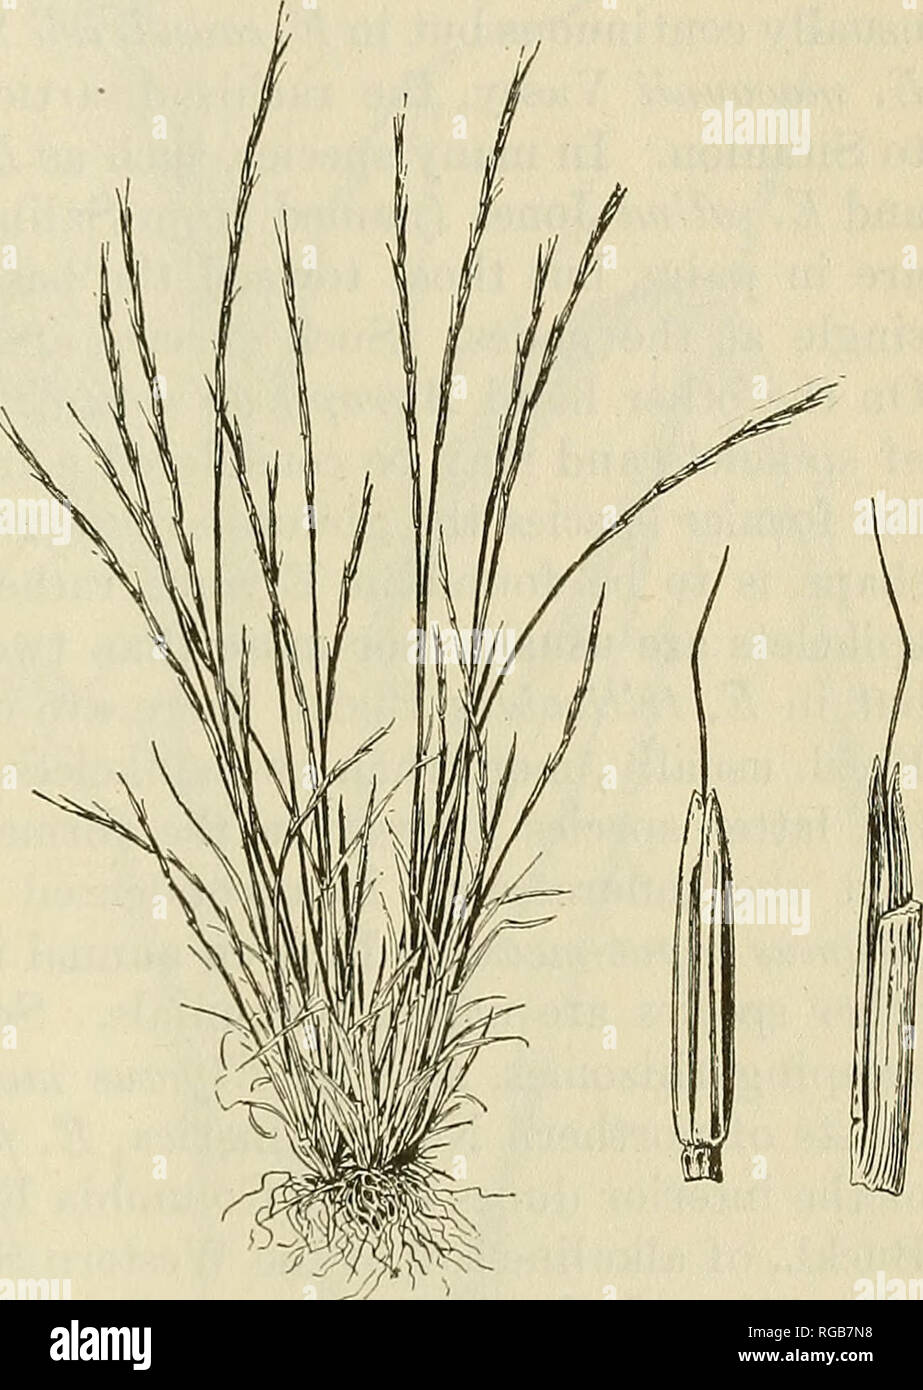 . Bulletin of the U.S. Department of Agriculture. Agriculture; Agriculture. GENEEA OF GRASSES OF THE UNITED STATES. 93 37. Elymus L. Spikelets 2 to 6 flowered, sessile in pairs (rarely 3 or more or soli- tary) at each node of a continuous rachis, the florets dorsiventral to the rachis: rachilla disarticulating above the glumes and between the florets; glmnes equal, usually rigid, sometimes indurate below, nar- row, sometimes subulate, 1 to several nerved, acute to aristate, some- what asymmetric and often placed in front of the spikelets; lemmas rounded on the back or nearly terete, obscurely  Stock Photo